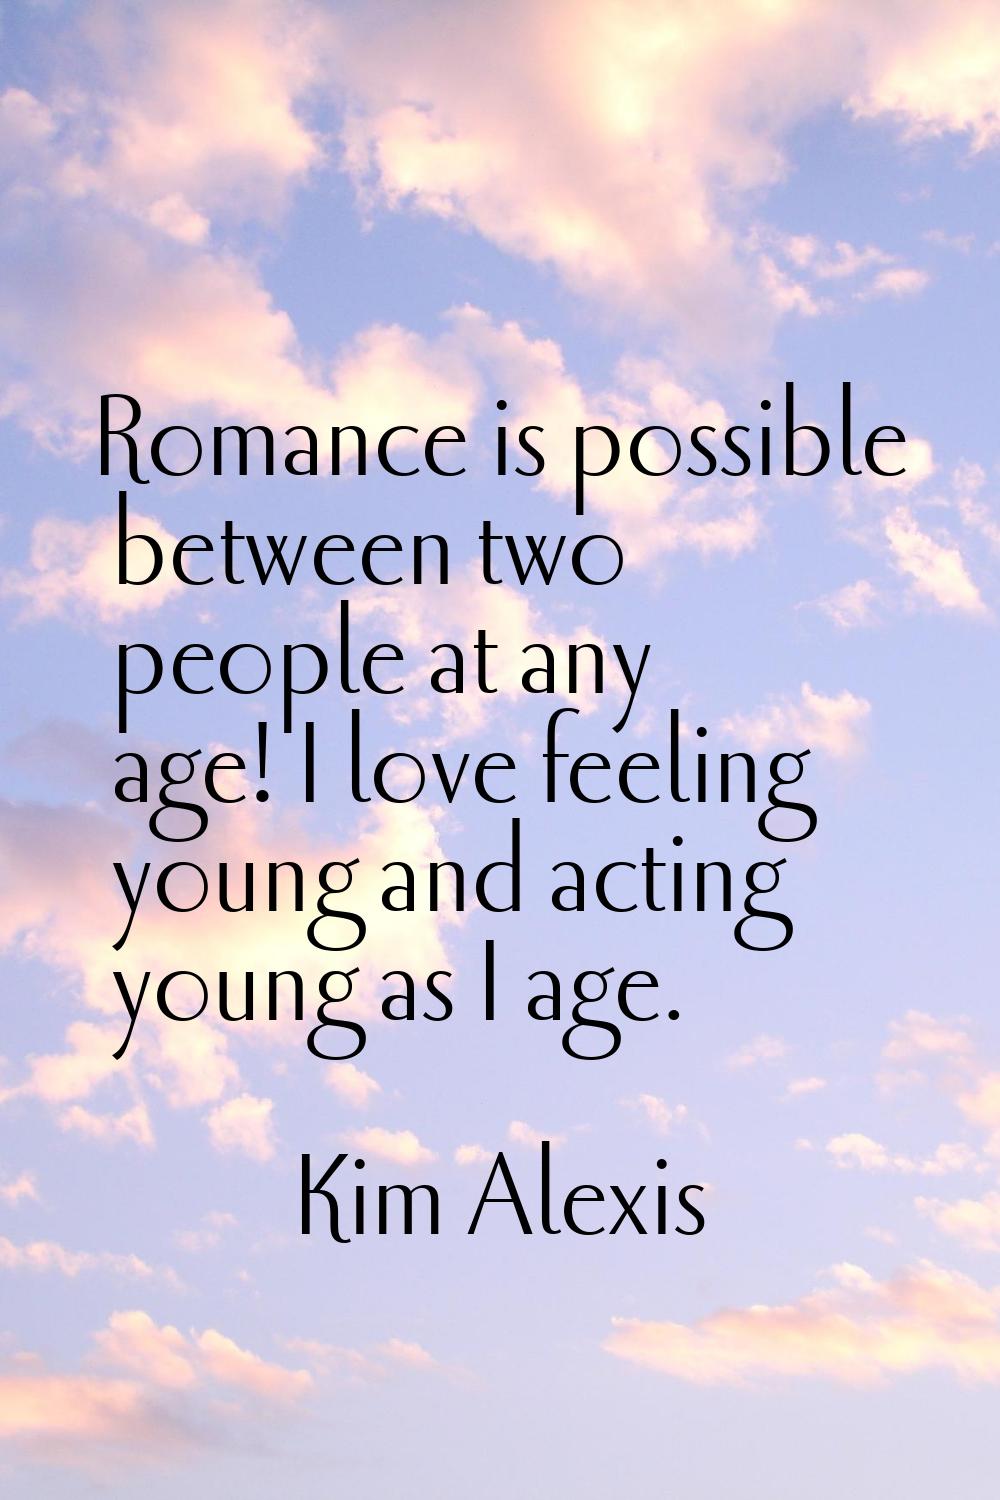 Romance is possible between two people at any age! I love feeling young and acting young as I age.